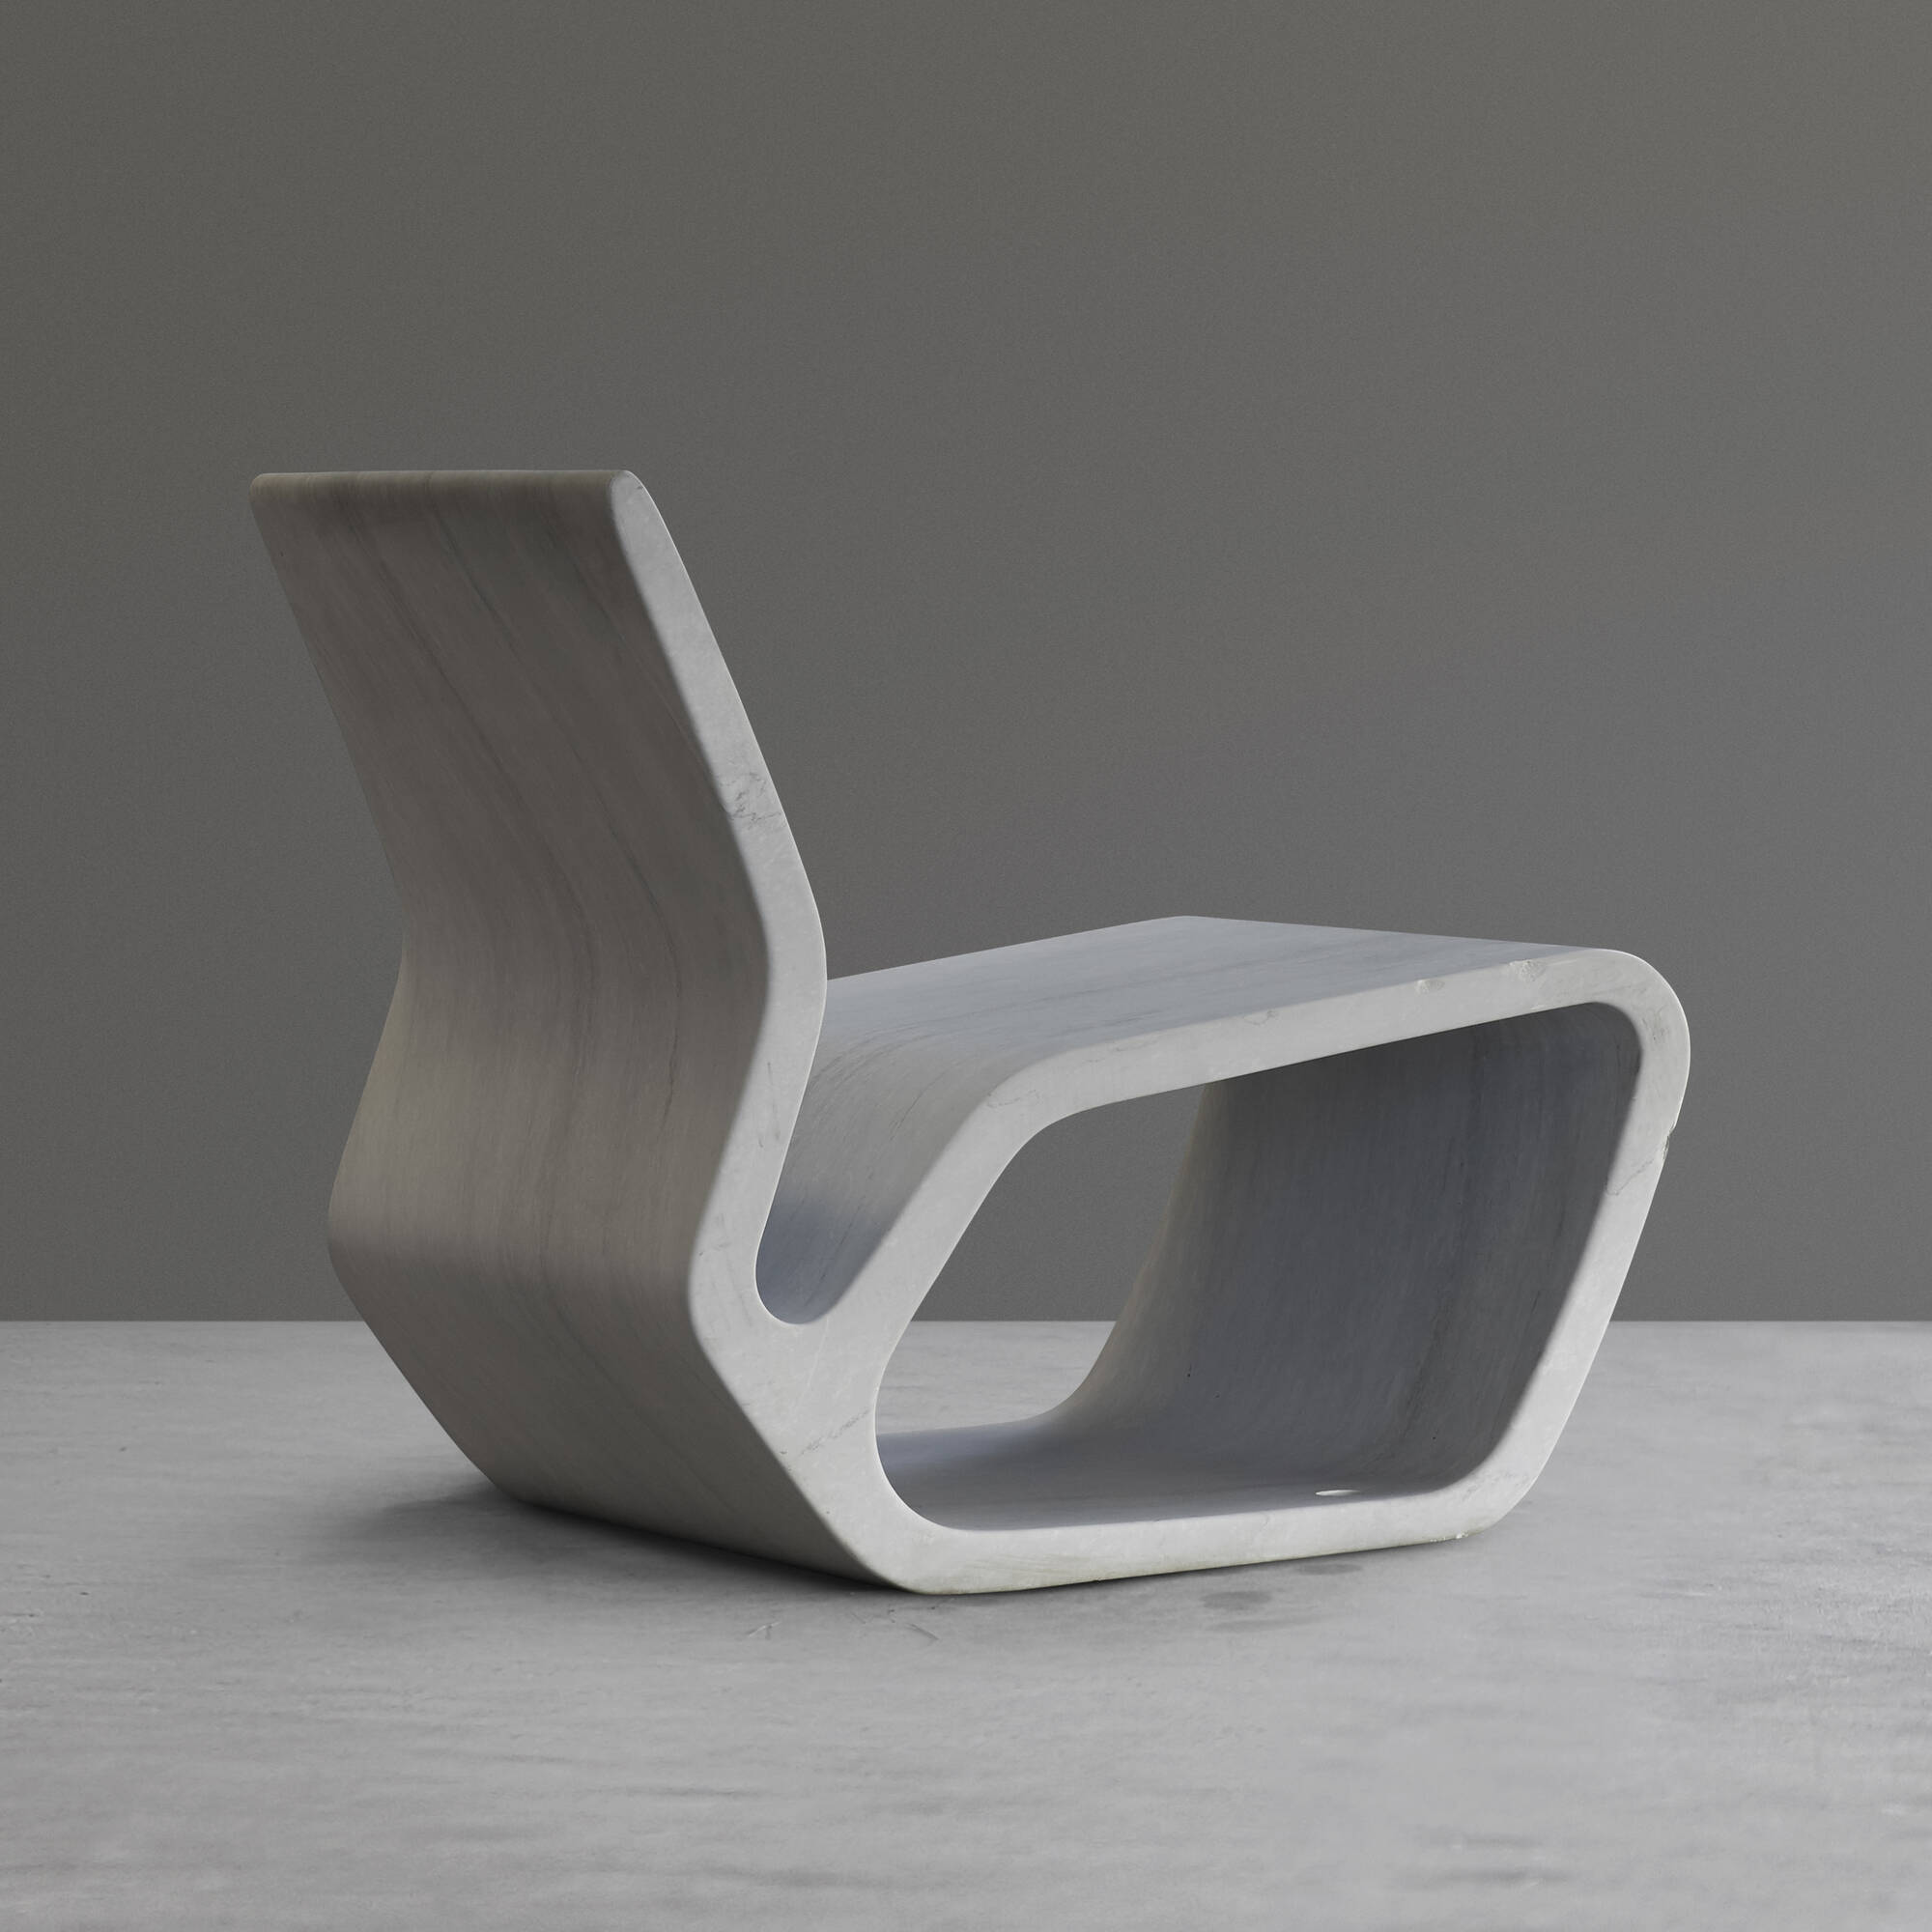 137: MARC NEWSON, Extruded Chair < Desire & Design: A Private